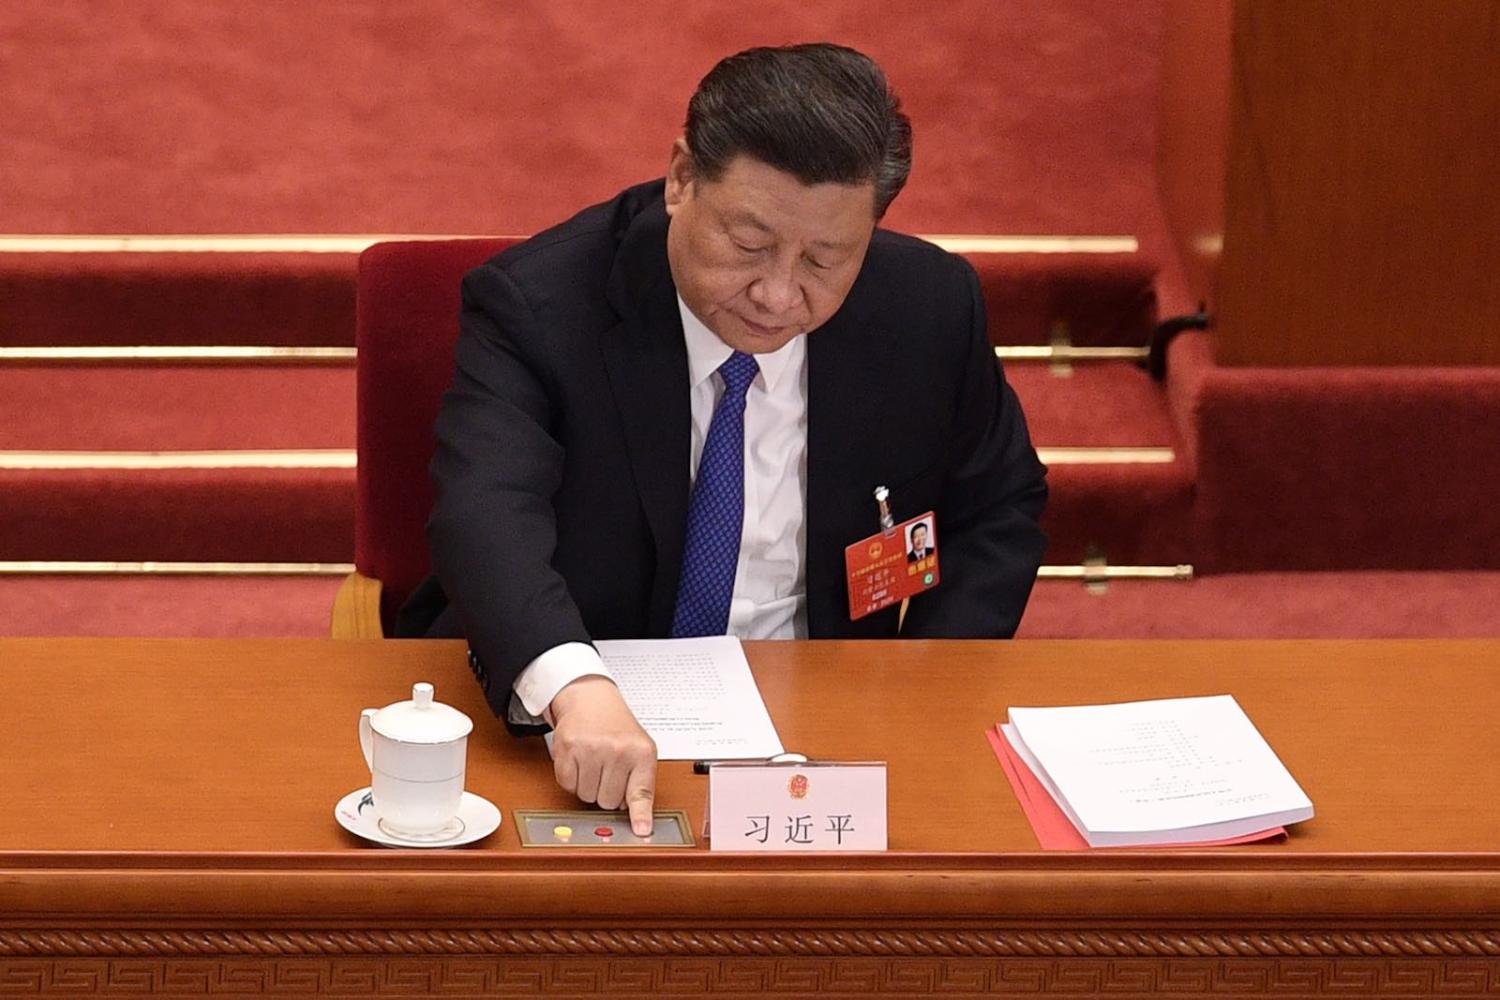 China’s Xi Jinping votes on the security law for Hong Kong during the National People's Congress in Beijing in May (Nicolas Asfouri/AFP/Getty Images)